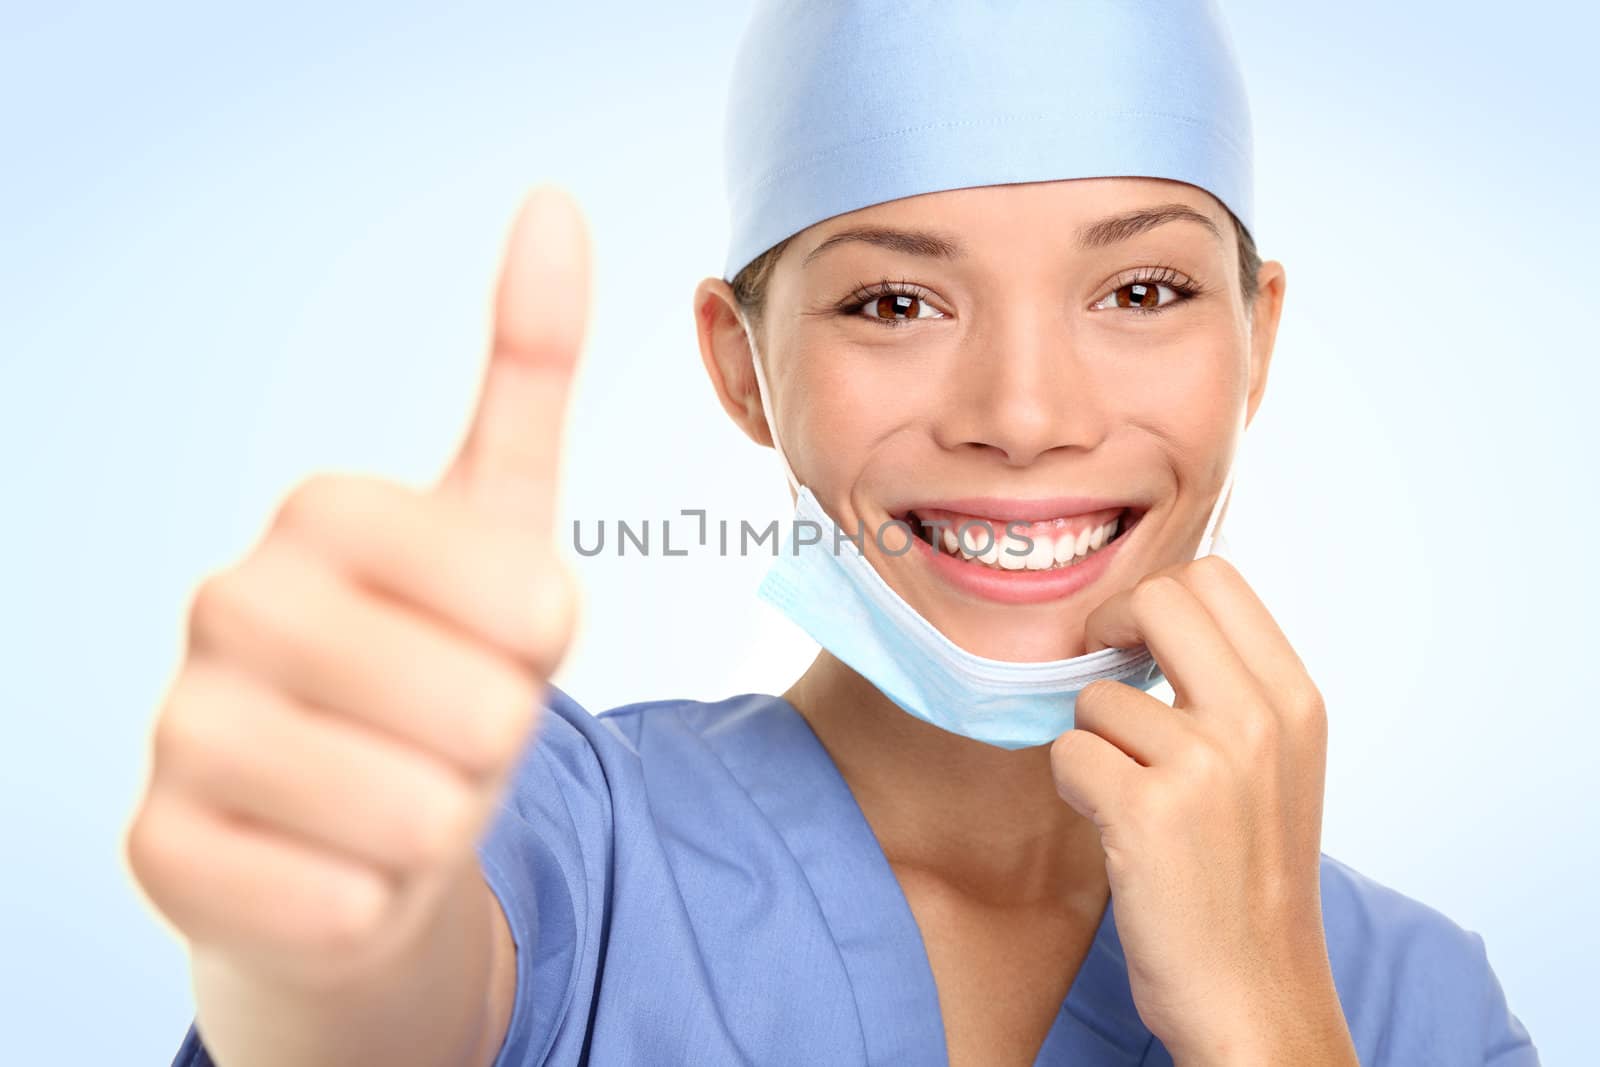 Young doctor or nurse giving thumbs up taking off the surgeon mask smiling. Asian / Caucasian female model in her mid 20s.